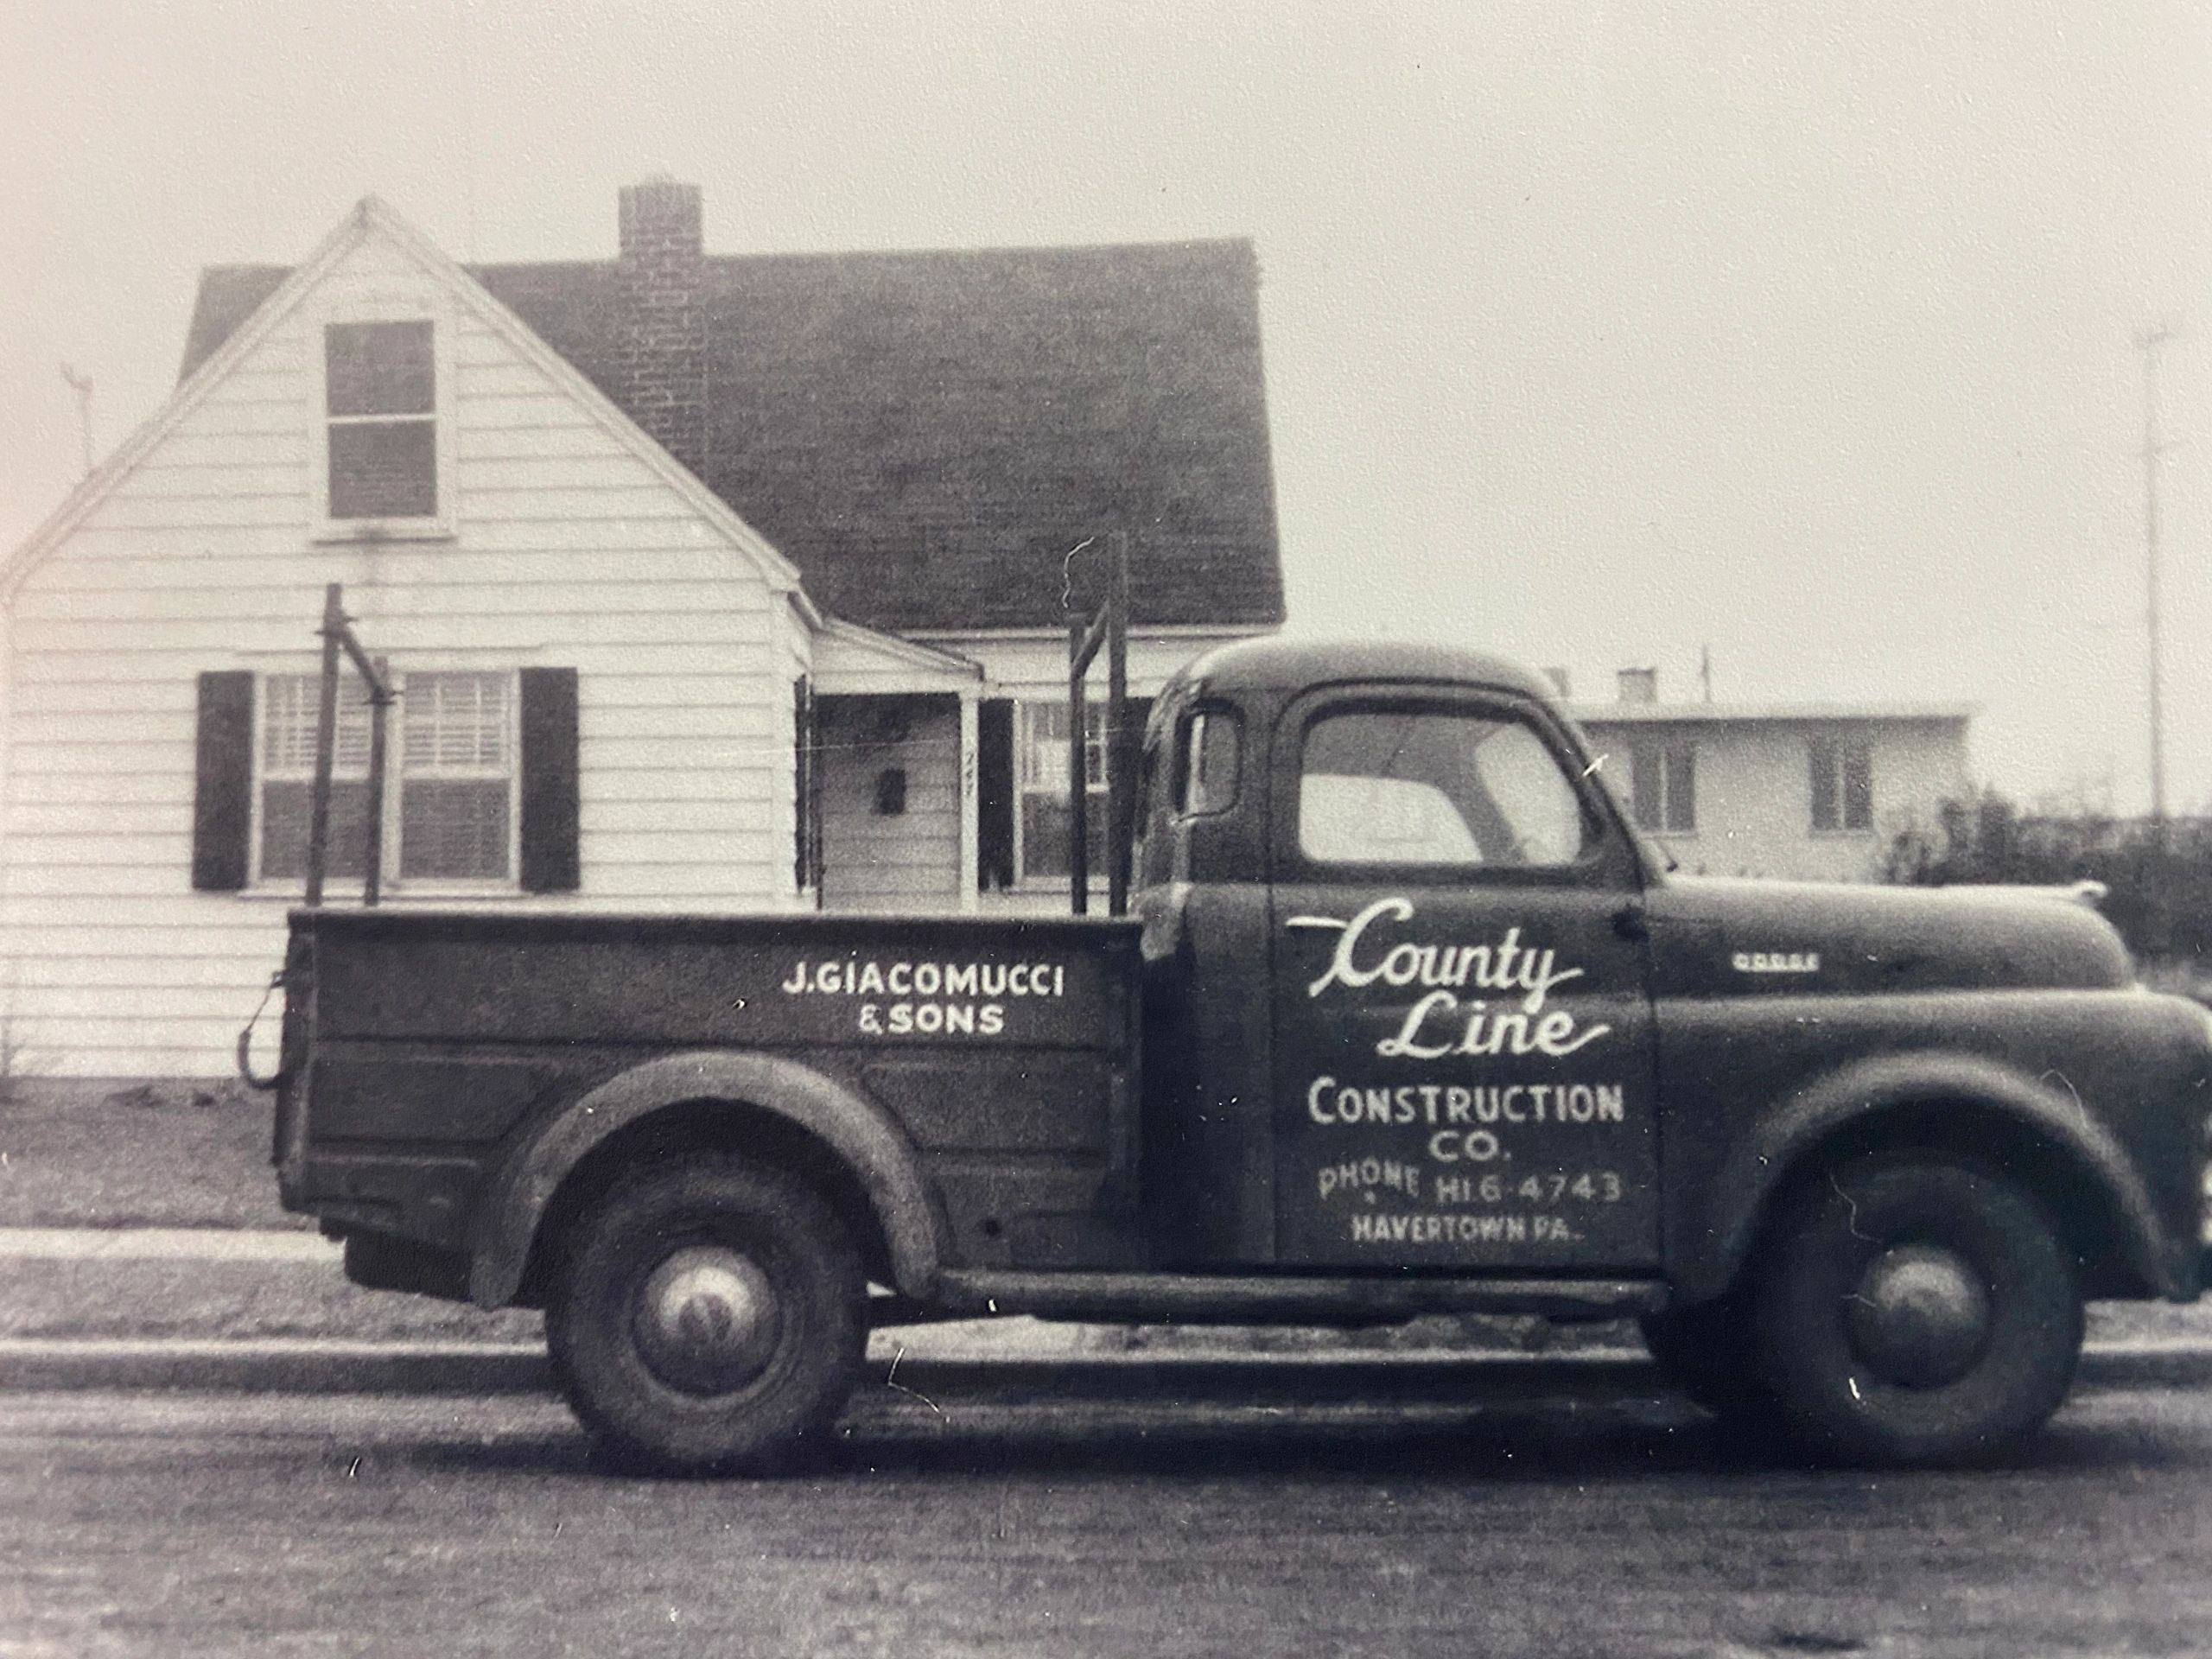 County Line Construction Co